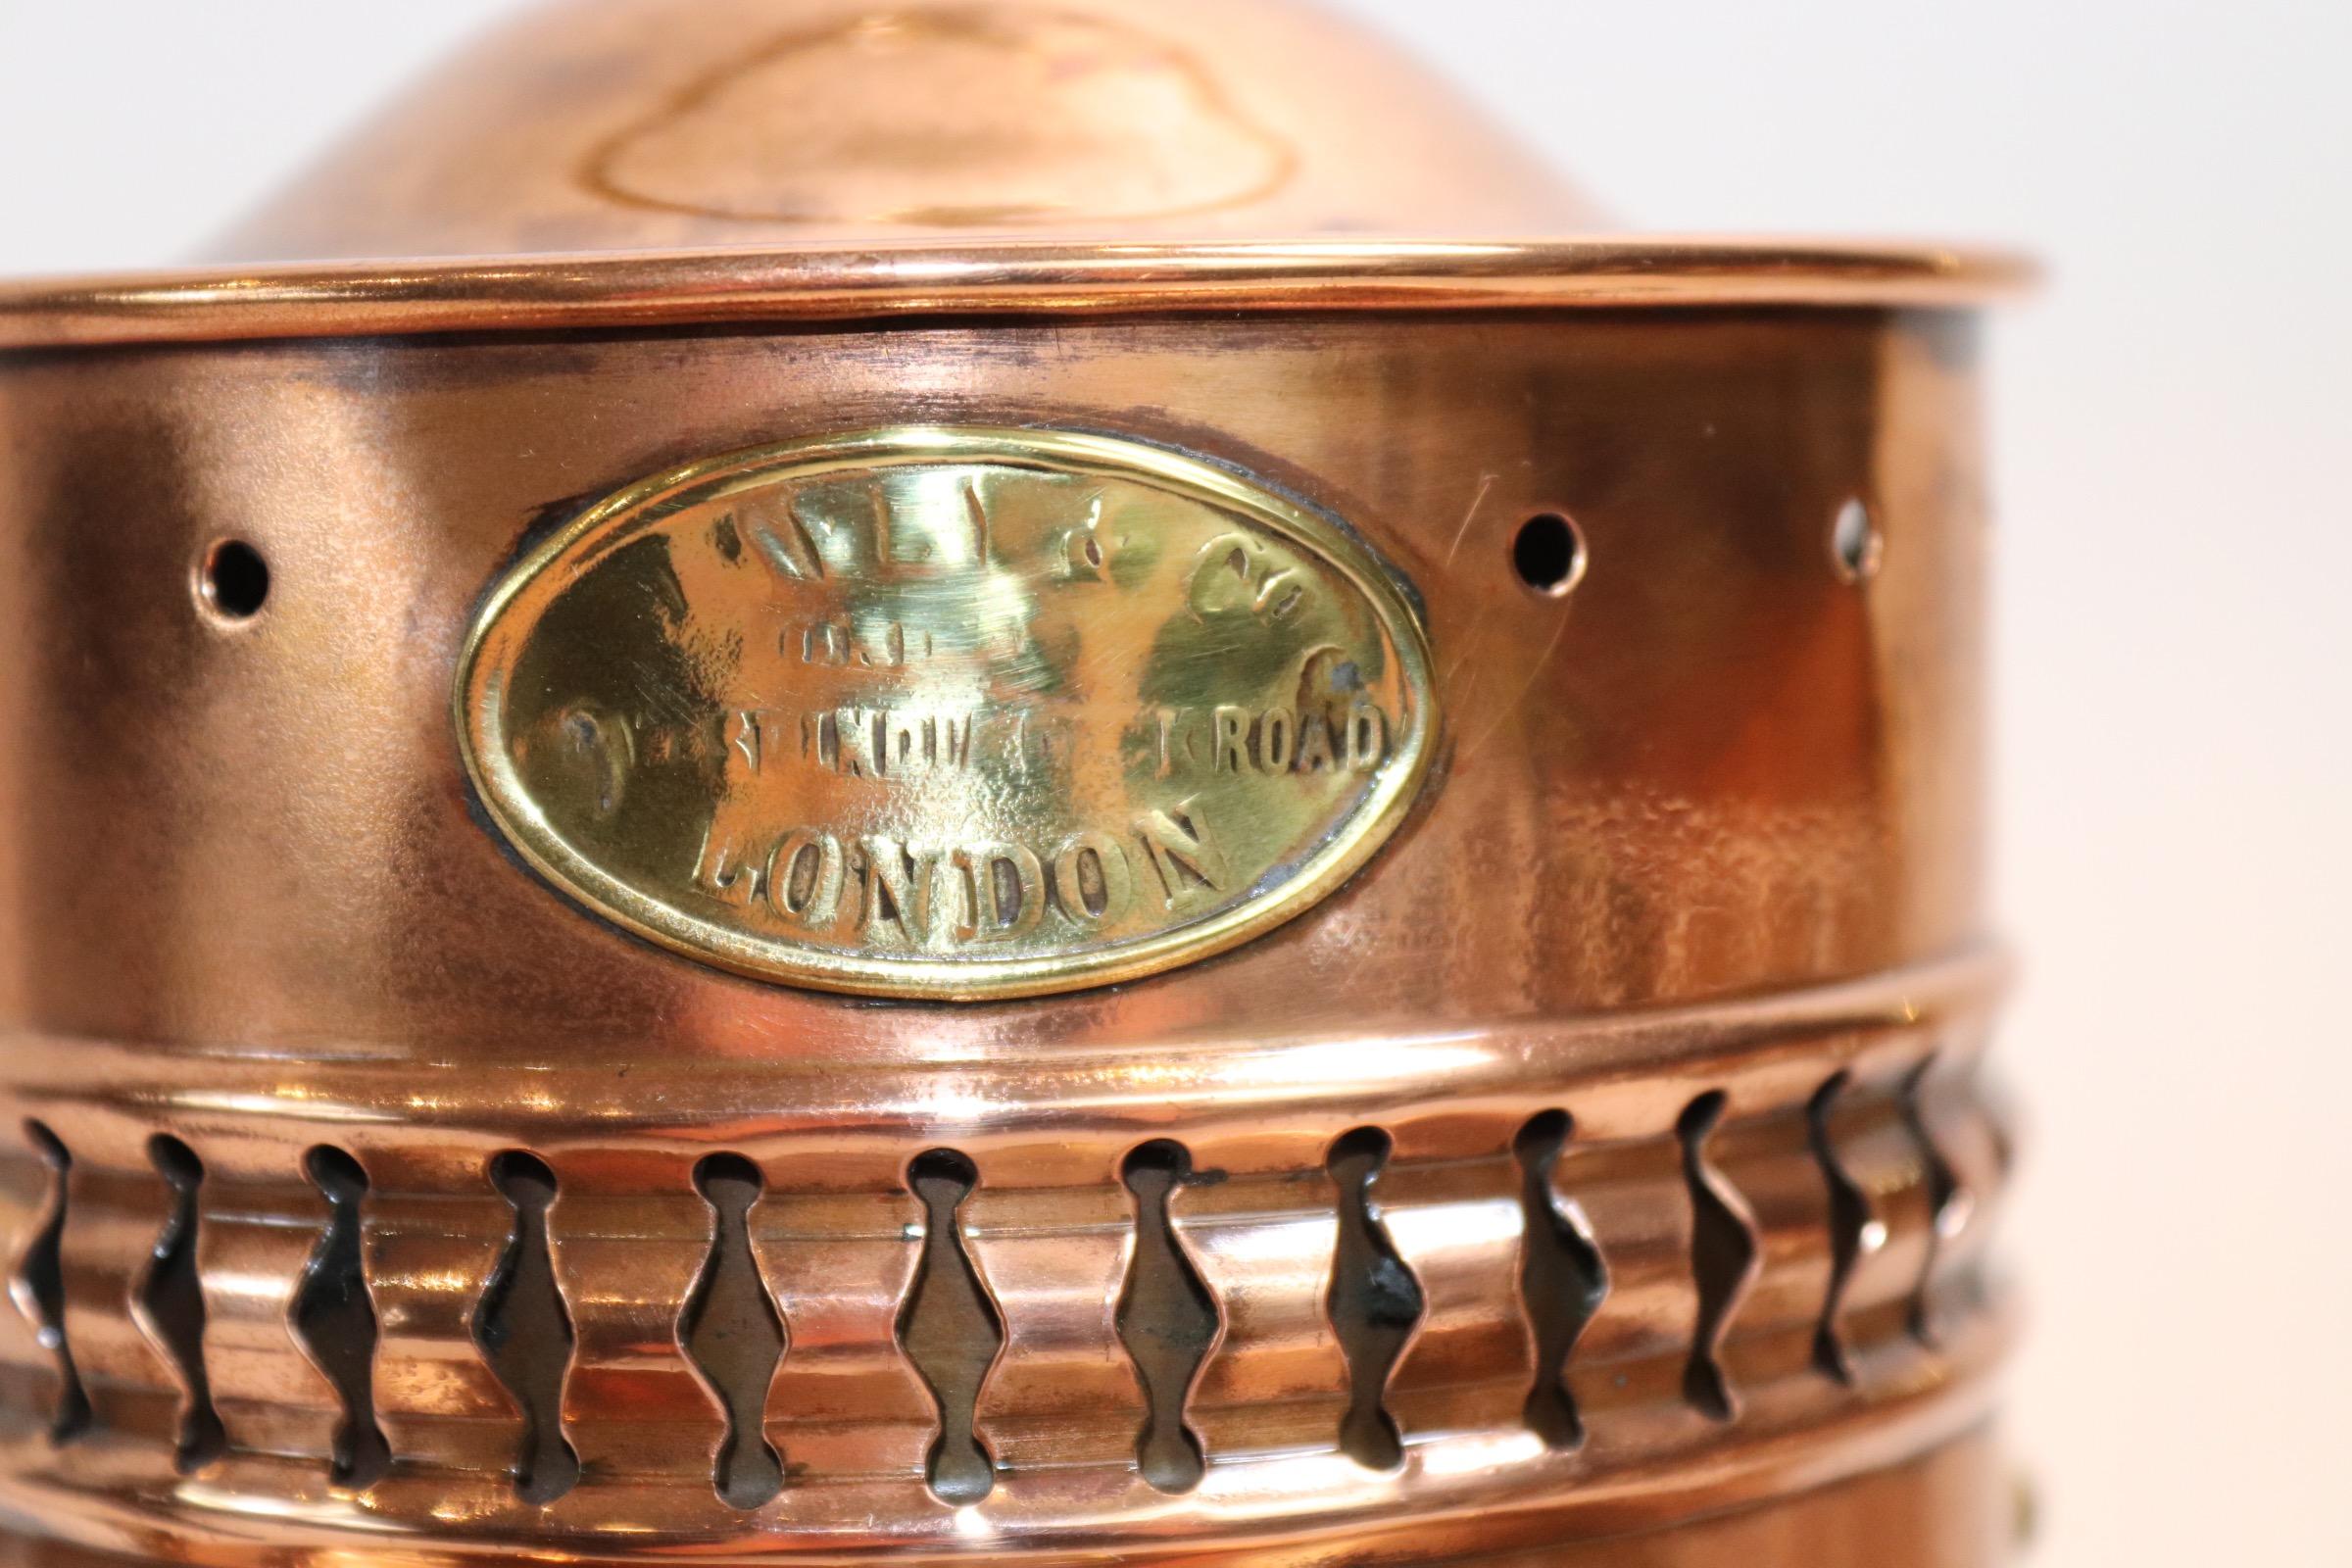 Solid copper ships cabin lantern with polished and lacquered finish. Original burner is intact with electric socket added from above for home display. With brass badge from maker Davey & Co. London Weight is 7 pounds.